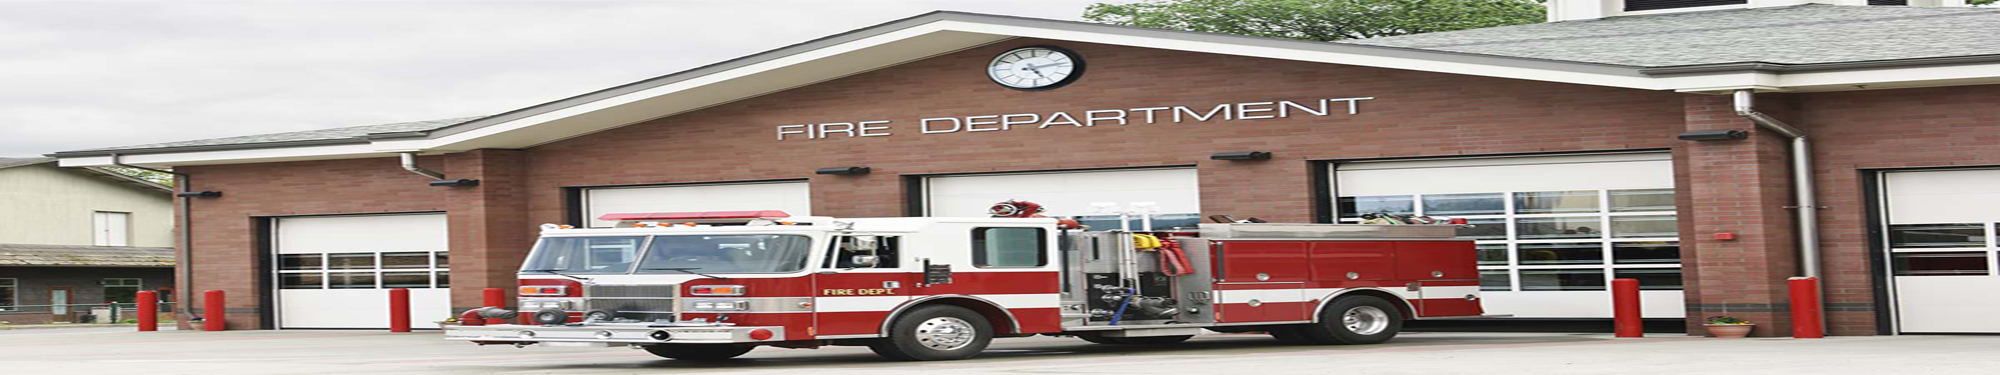 Fire station image